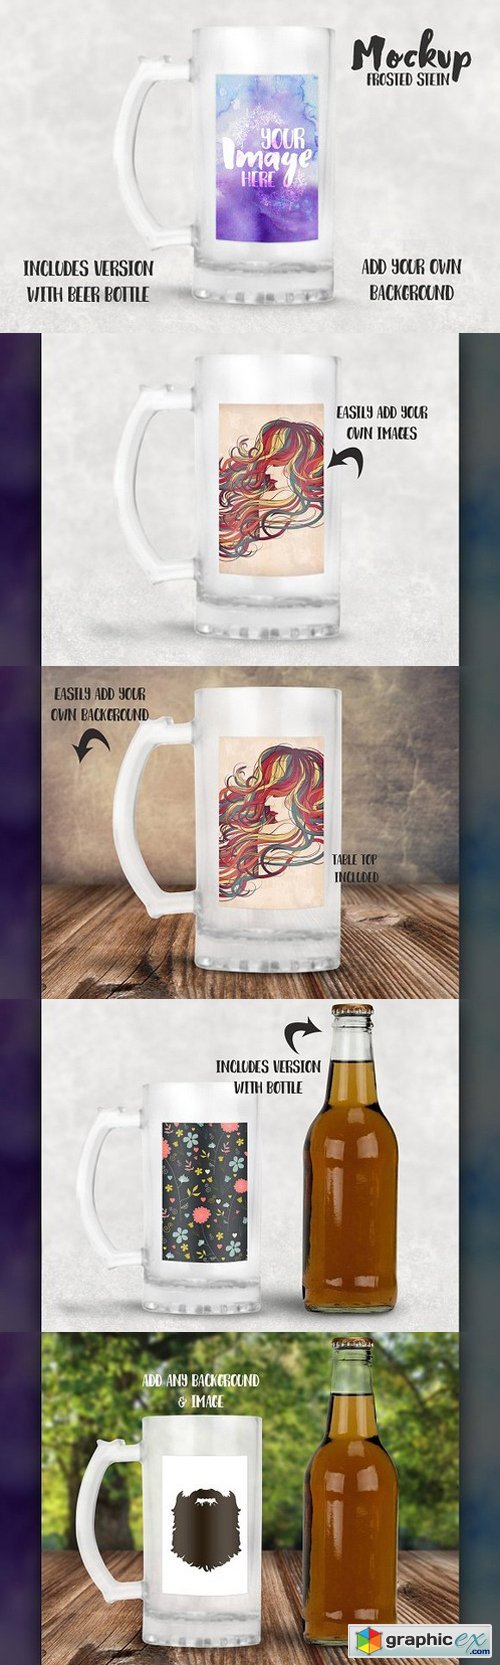 Frosted glass stein mockup